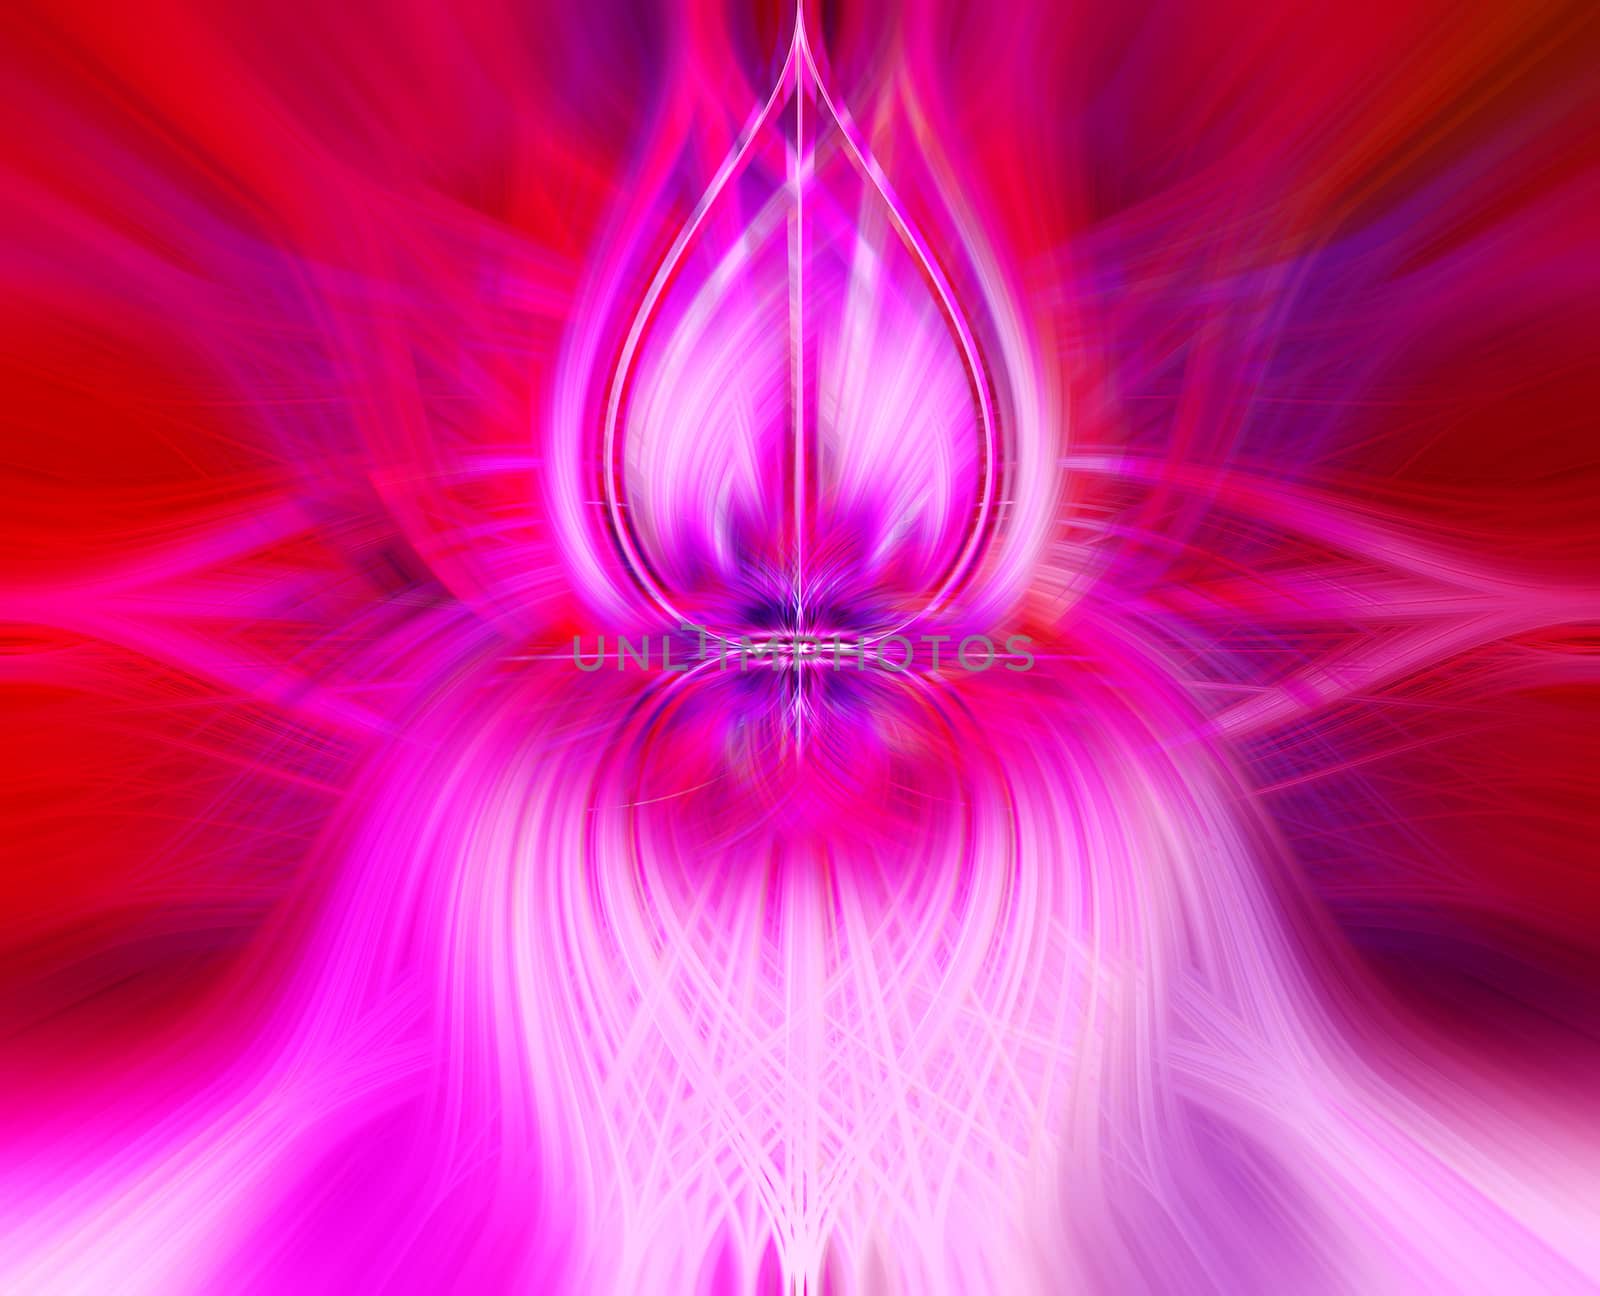 Beautiful abstract intertwined 3d fibers forming an ornament out of various symmetrical shapes. Purple, pink, red, and blue colors. Illustration.